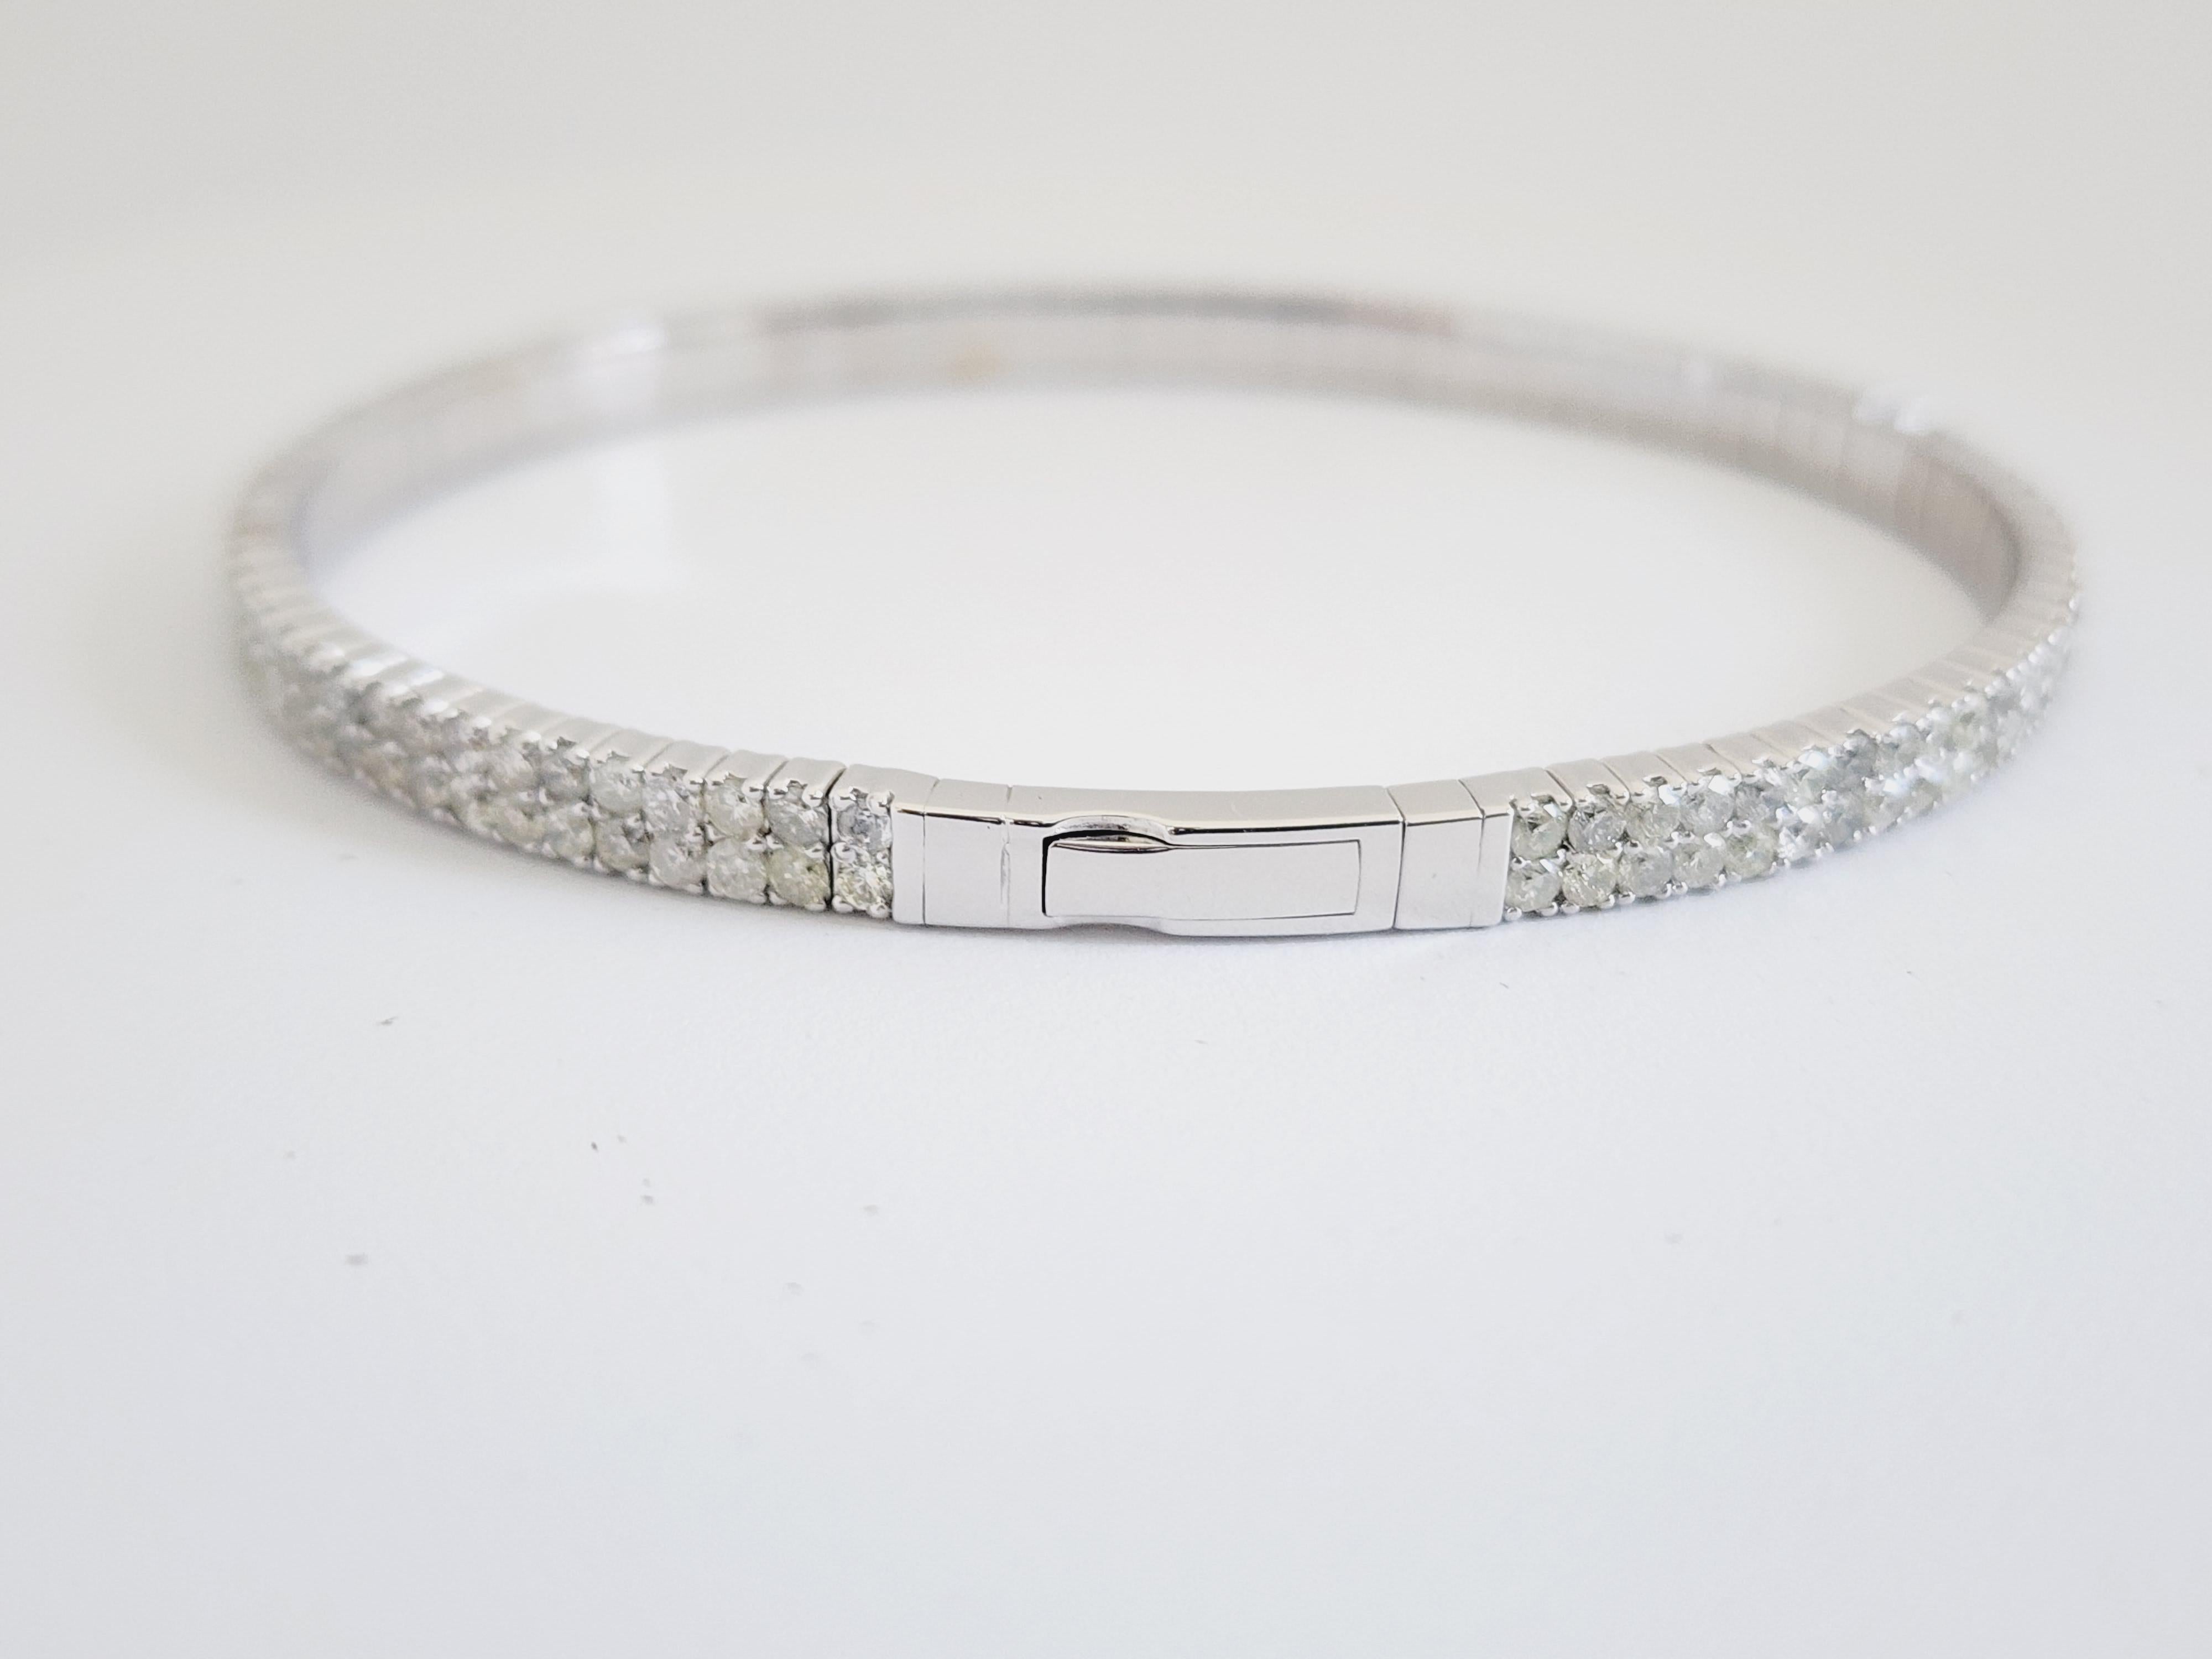 Natural Diamonds 4.87 ctw Flexible double row bangle white gold 14k 
7 Inch. Color I, Clarity I2. 4 mm wide.